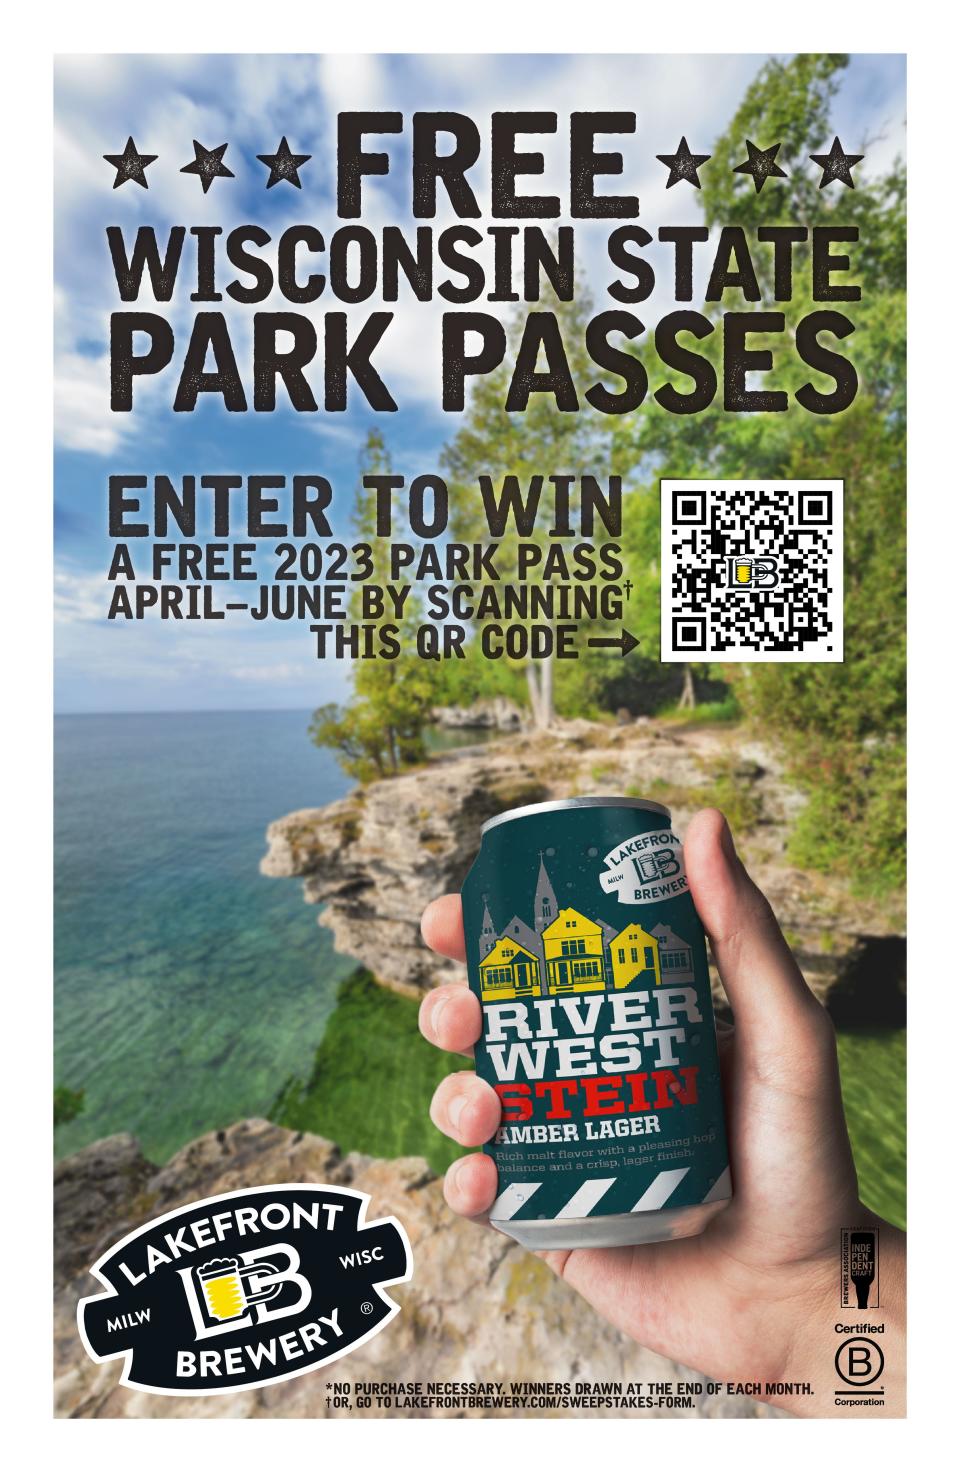 Lakefront Brewery is giving away free Wisconsin state park passes in a contest that runs from April through June.